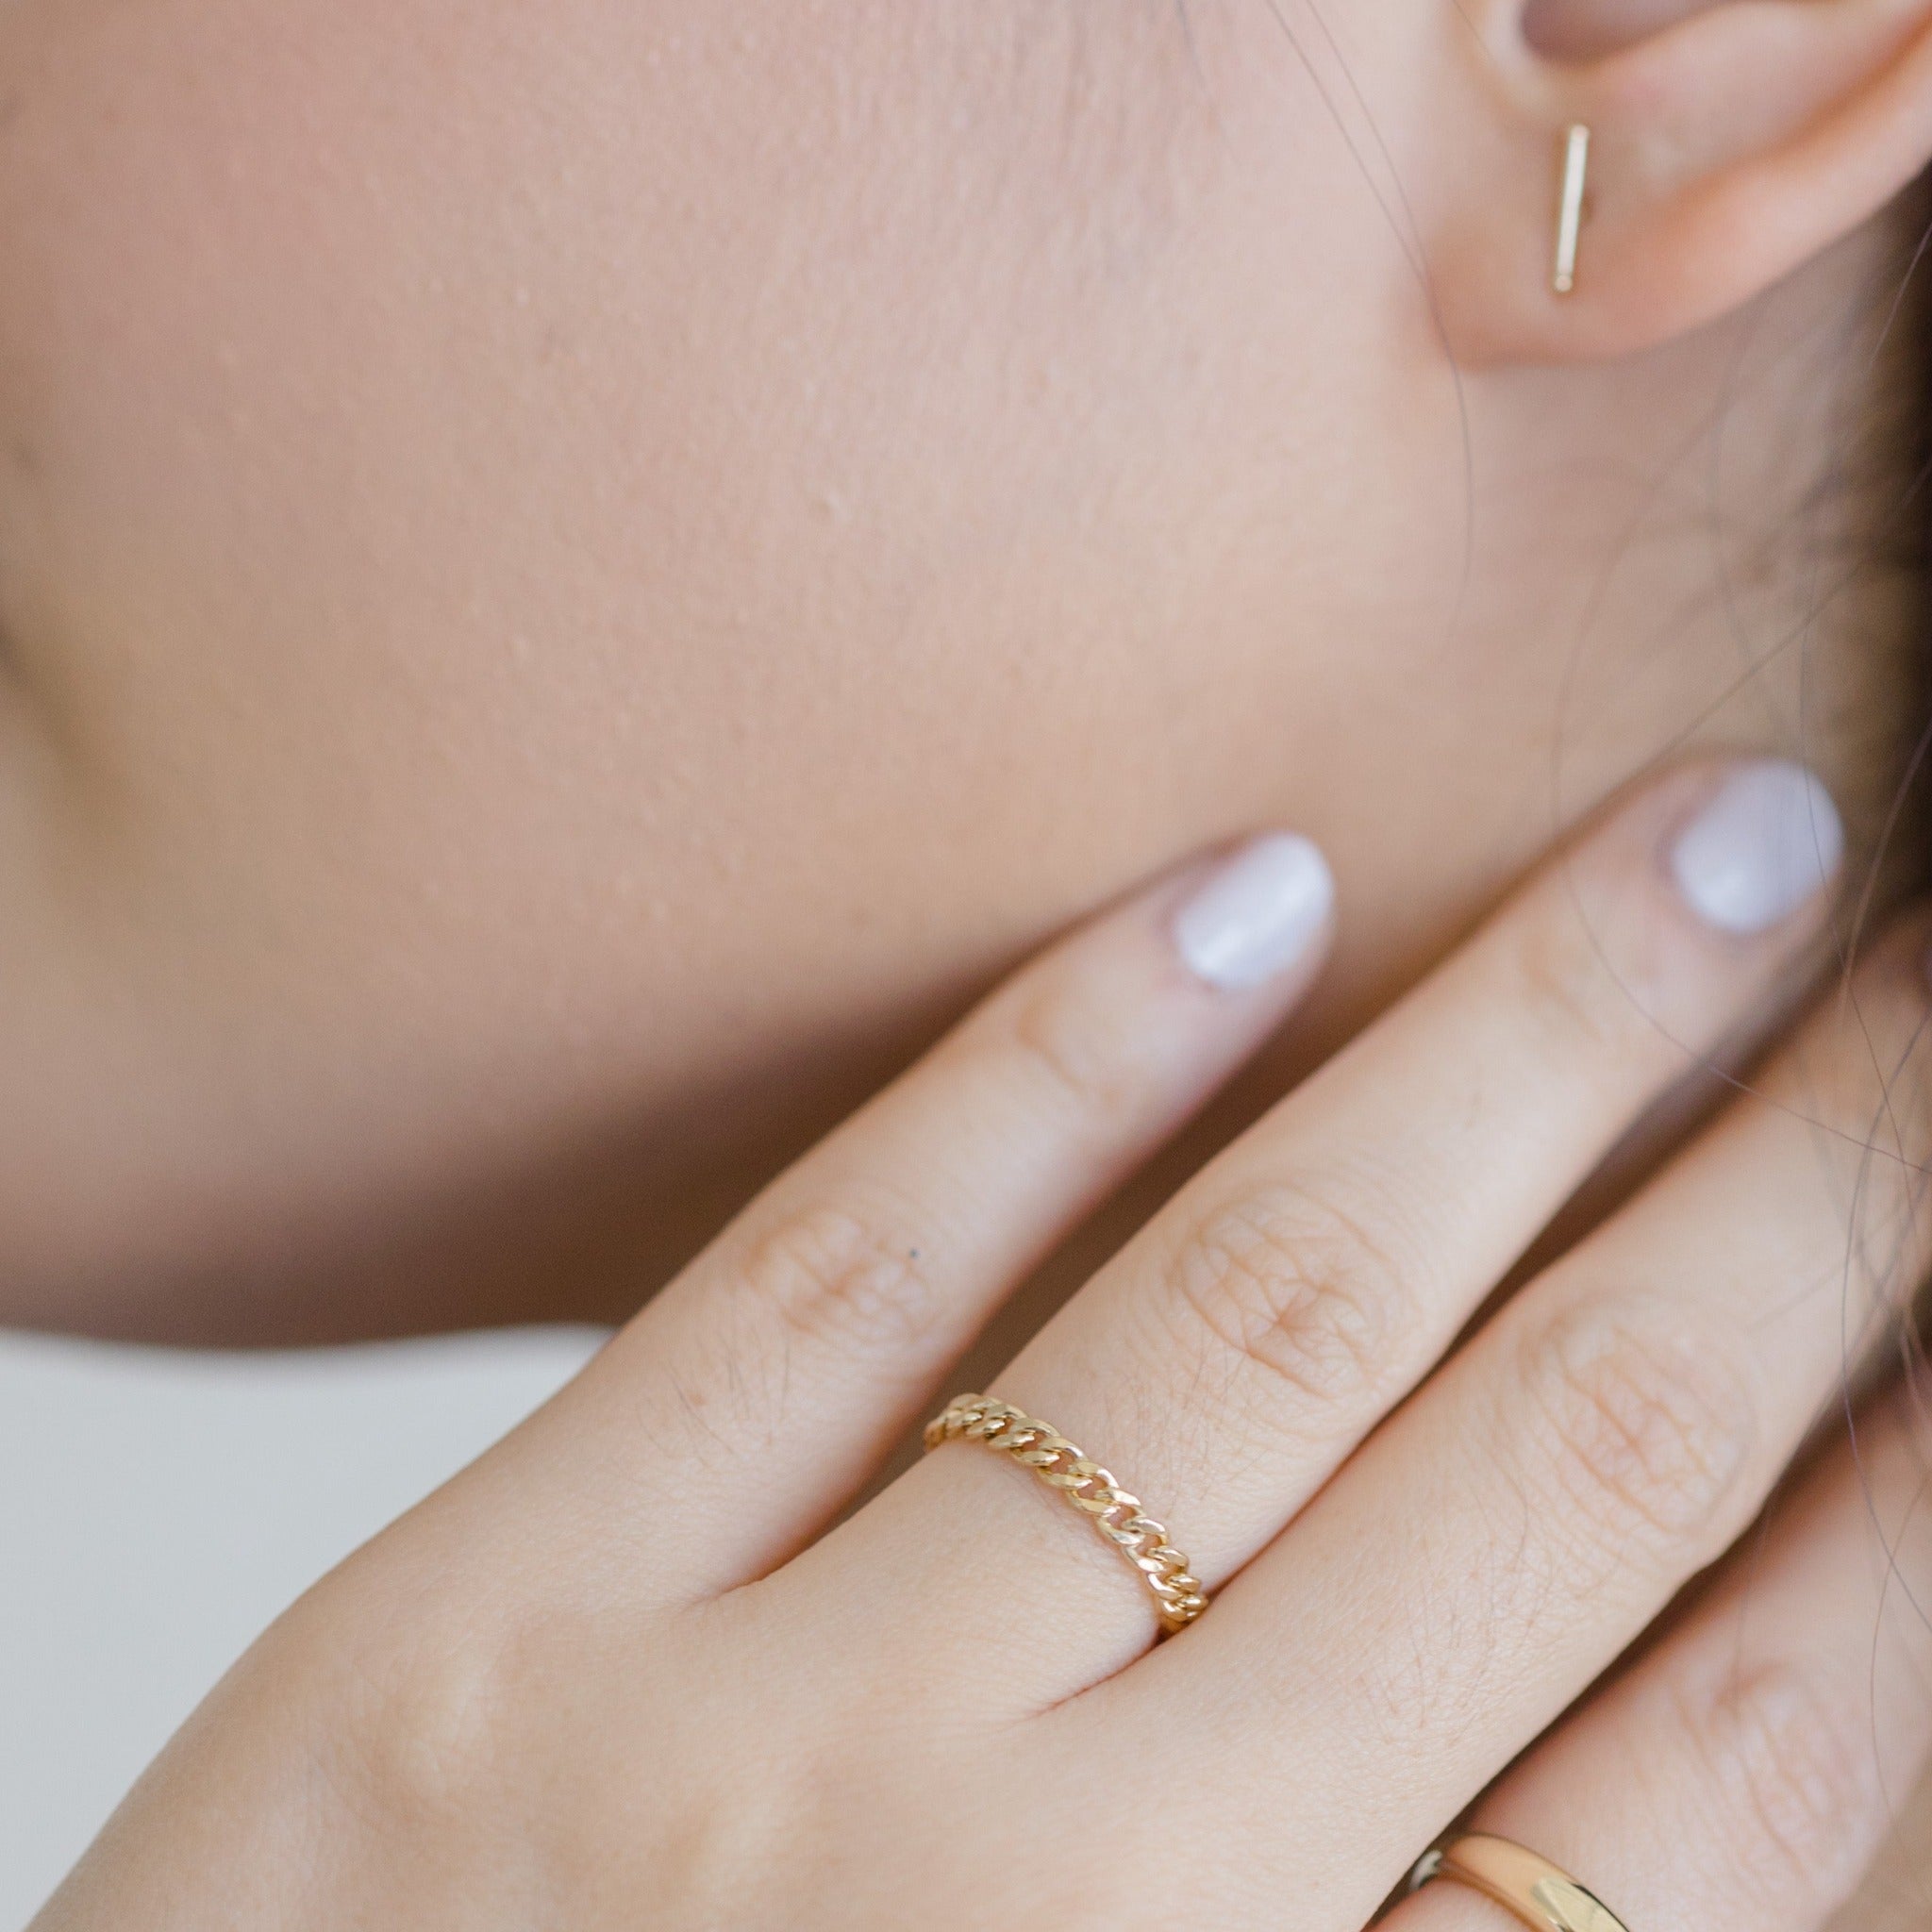 The chain ring is made with 14k gold filled metal that is very durable.